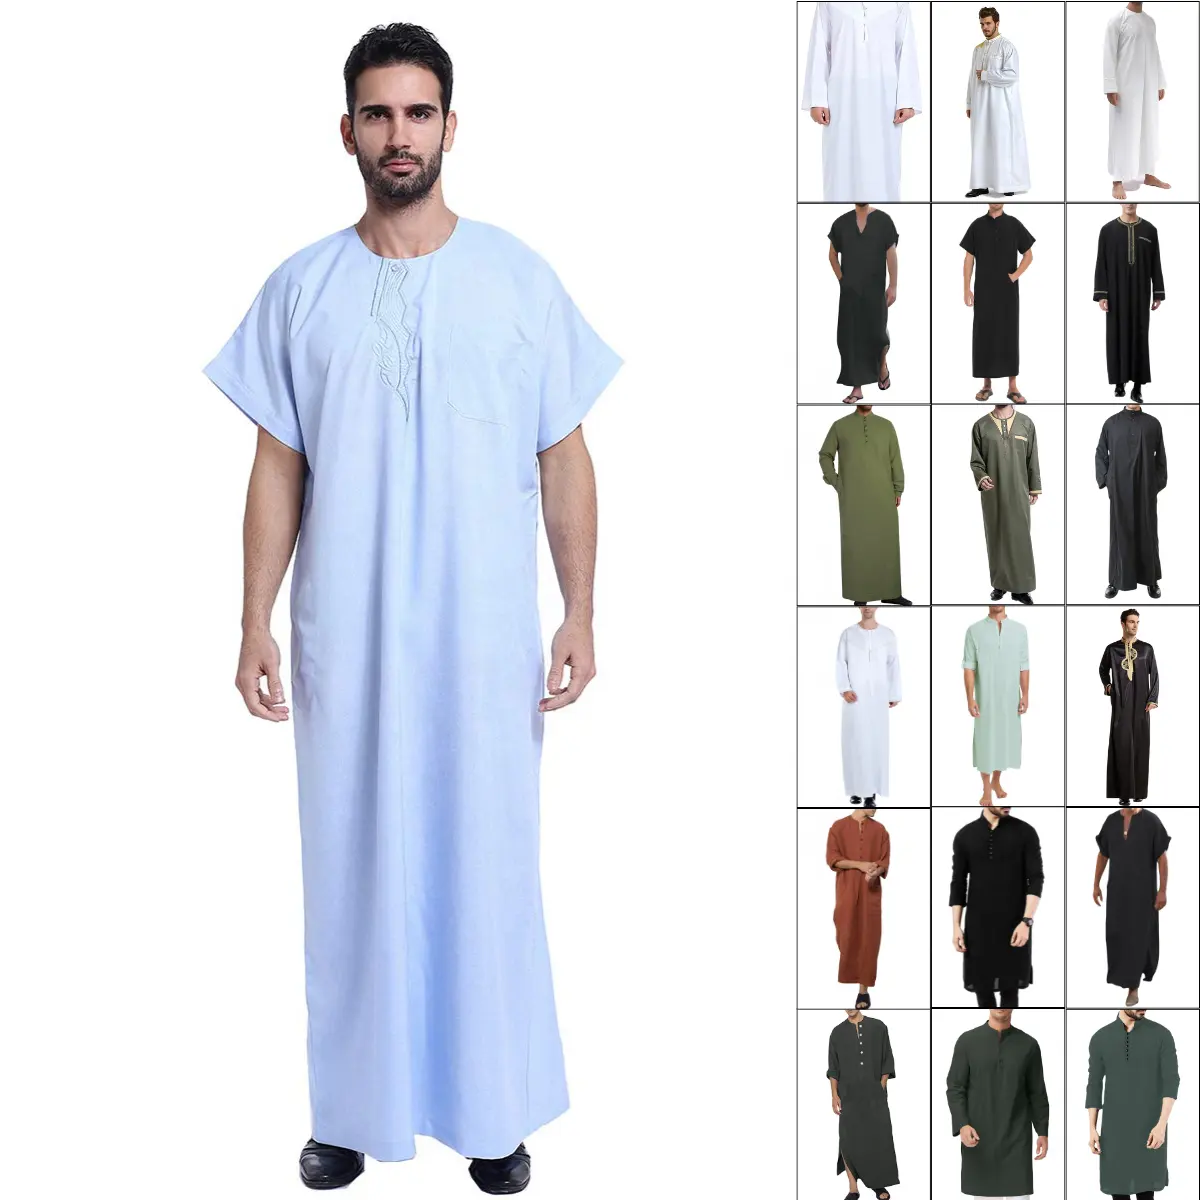 Arabic Men Robe Khal Brand Long Sleeve Polyester Material White Thobe With Pants For Muslim